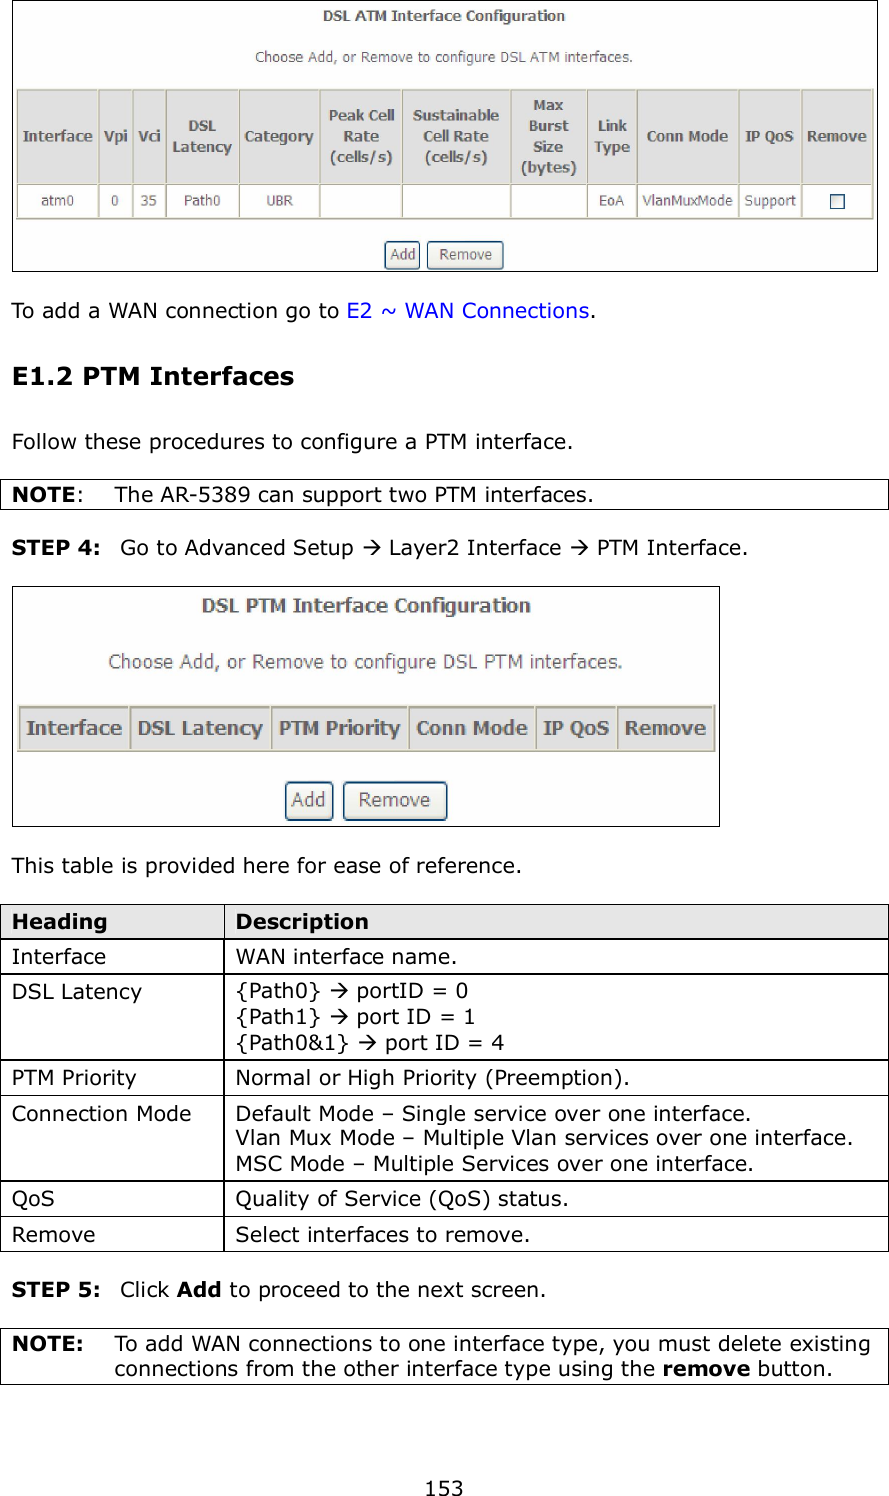  153   To add a WAN connection go to E2 ~ WAN Connections. E1.2 PTM Interfaces Follow these procedures to configure a PTM interface.      NOTE:  The AR-5389 can support two PTM interfaces.    STEP 4:  Go to Advanced Setup  Layer2 Interface  PTM Interface.    This table is provided here for ease of reference.  Heading  Description Interface  WAN interface name. DSL Latency  {Path0}  portID = 0   {Path1}  port ID = 1 {Path0&amp;1}  port ID = 4   PTM Priority  Normal or High Priority (Preemption). Connection Mode  Default Mode – Single service over one interface. Vlan Mux Mode – Multiple Vlan services over one interface. MSC Mode – Multiple Services over one interface.   QoS  Quality of Service (QoS) status. Remove  Select interfaces to remove.  STEP 5:  Click Add to proceed to the next screen.    NOTE:  To add WAN connections to one interface type, you must delete existing connections from the other interface type using the remove button.     